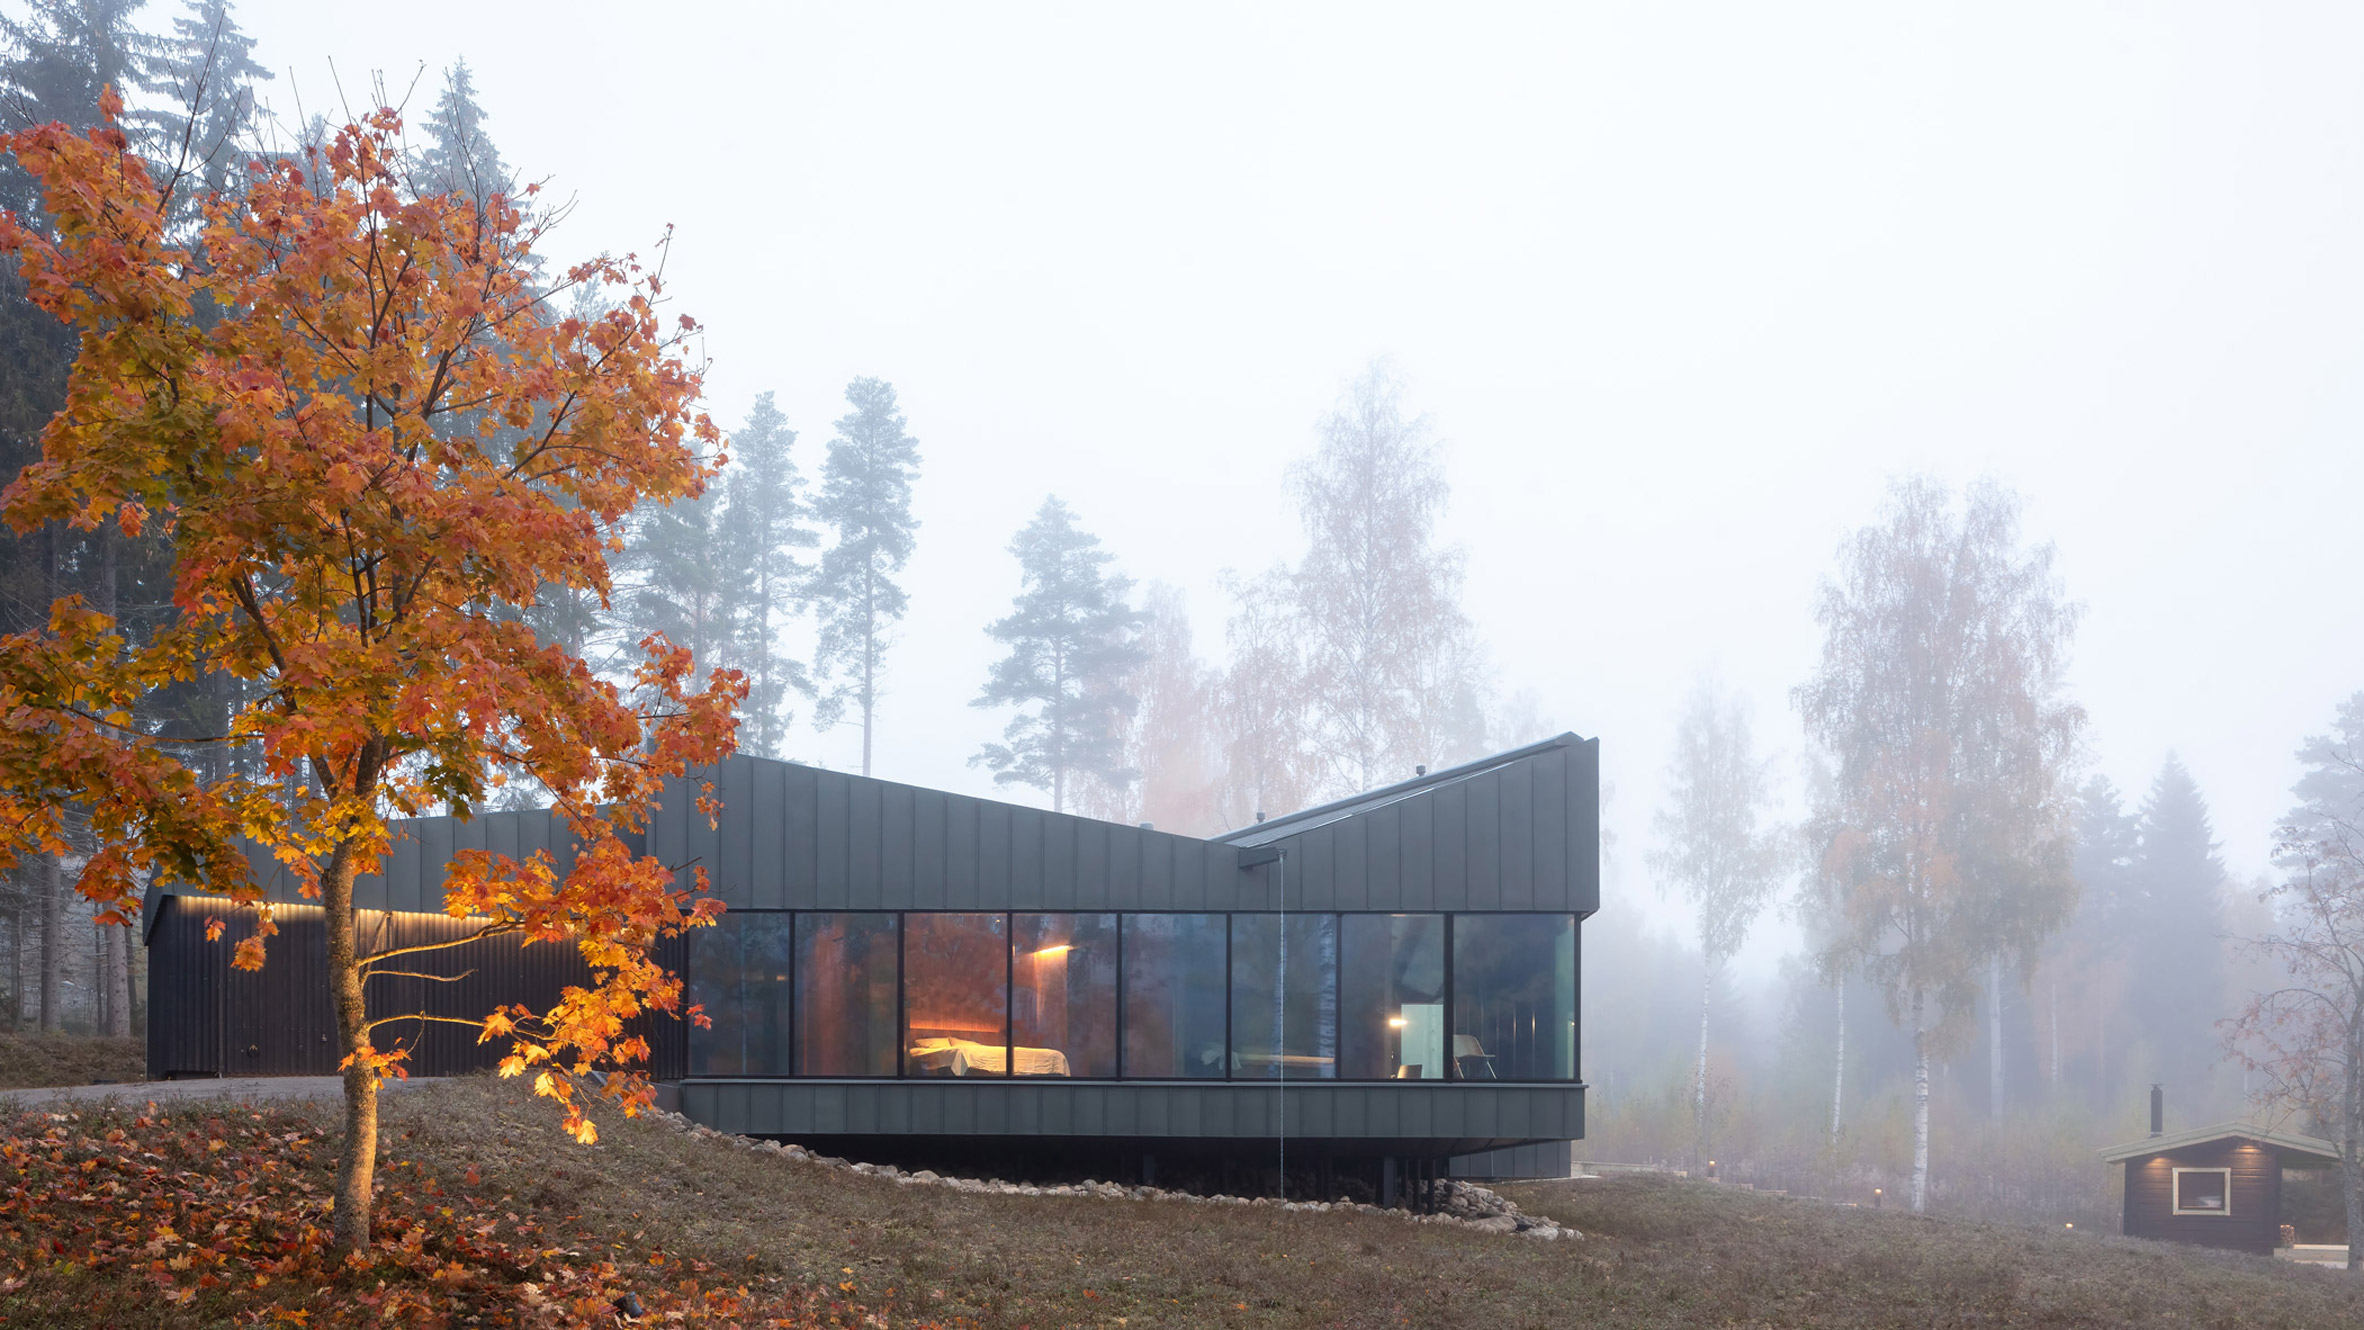 Studio Puisto designs black and zink house next to a Finnish lake